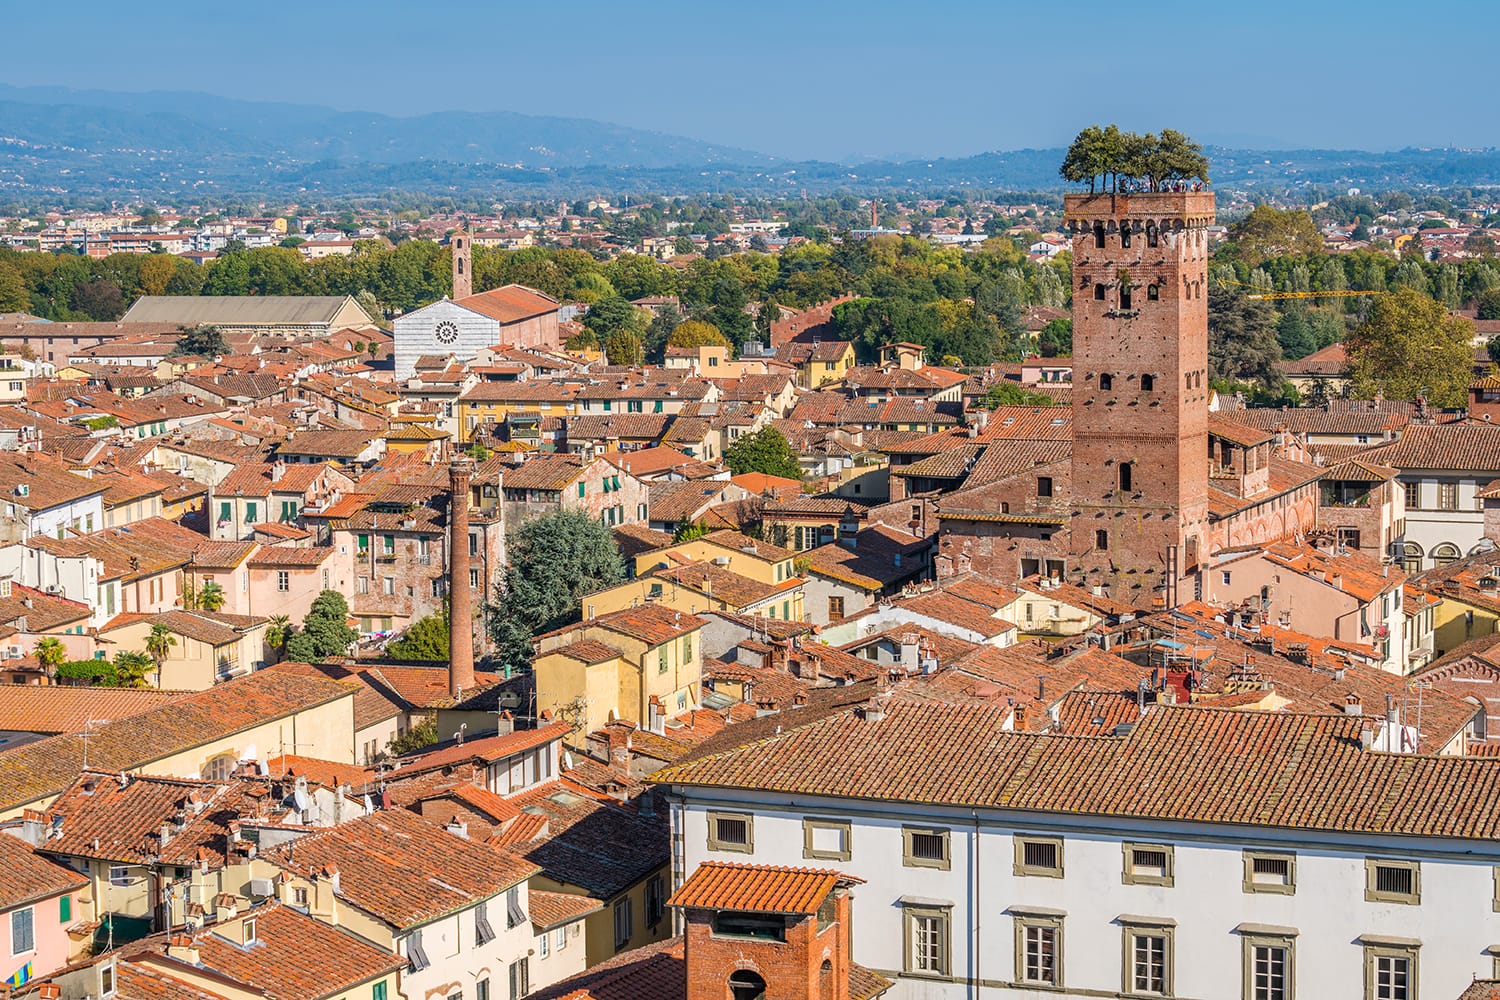 Panoramic view in Lucca, with the famous Guinigi Tower. Tuscany, Italy.